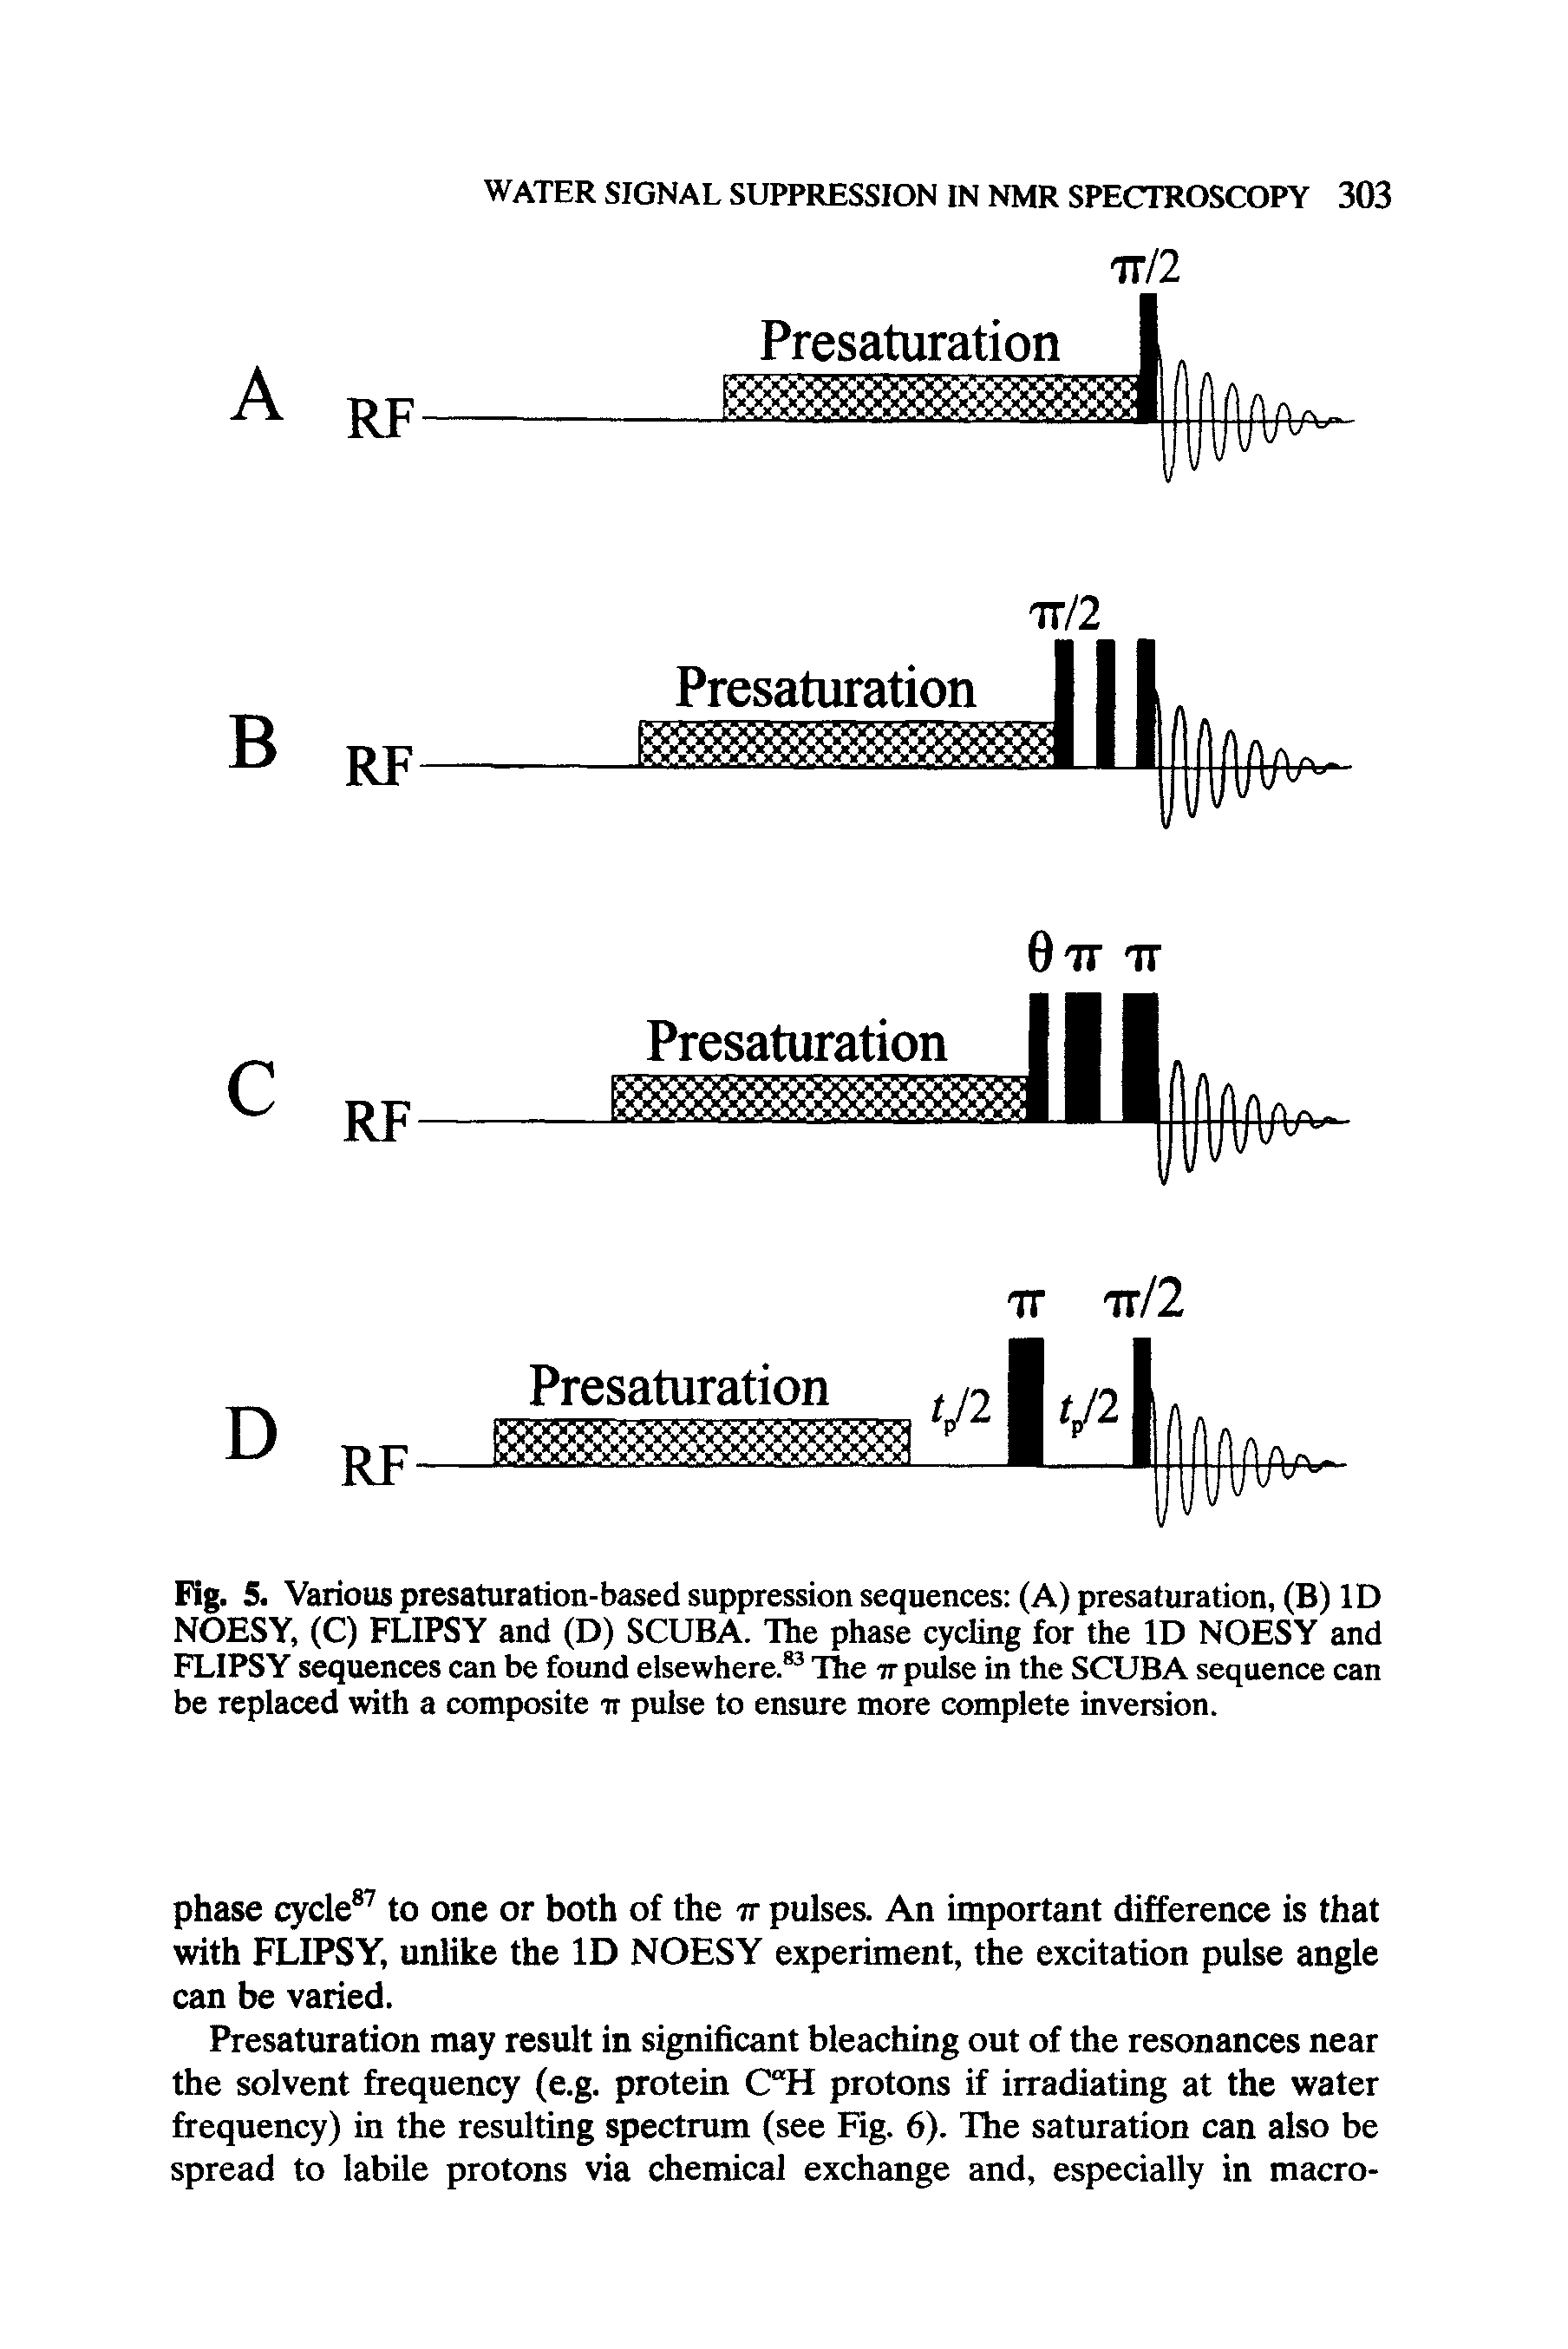 Fig. 5. Various presaturation-based suppression sequences (A) presaturation, (B) ID NOESY, (C) FLIPSY and (D) SCUBA. TTie phase cycling for the ID NOESY and FLIPSY sequences can be found elsewhere. The tt pulse in the SCUBA sequence can be replaced with a composite tt pulse to ensure more complete inversion.